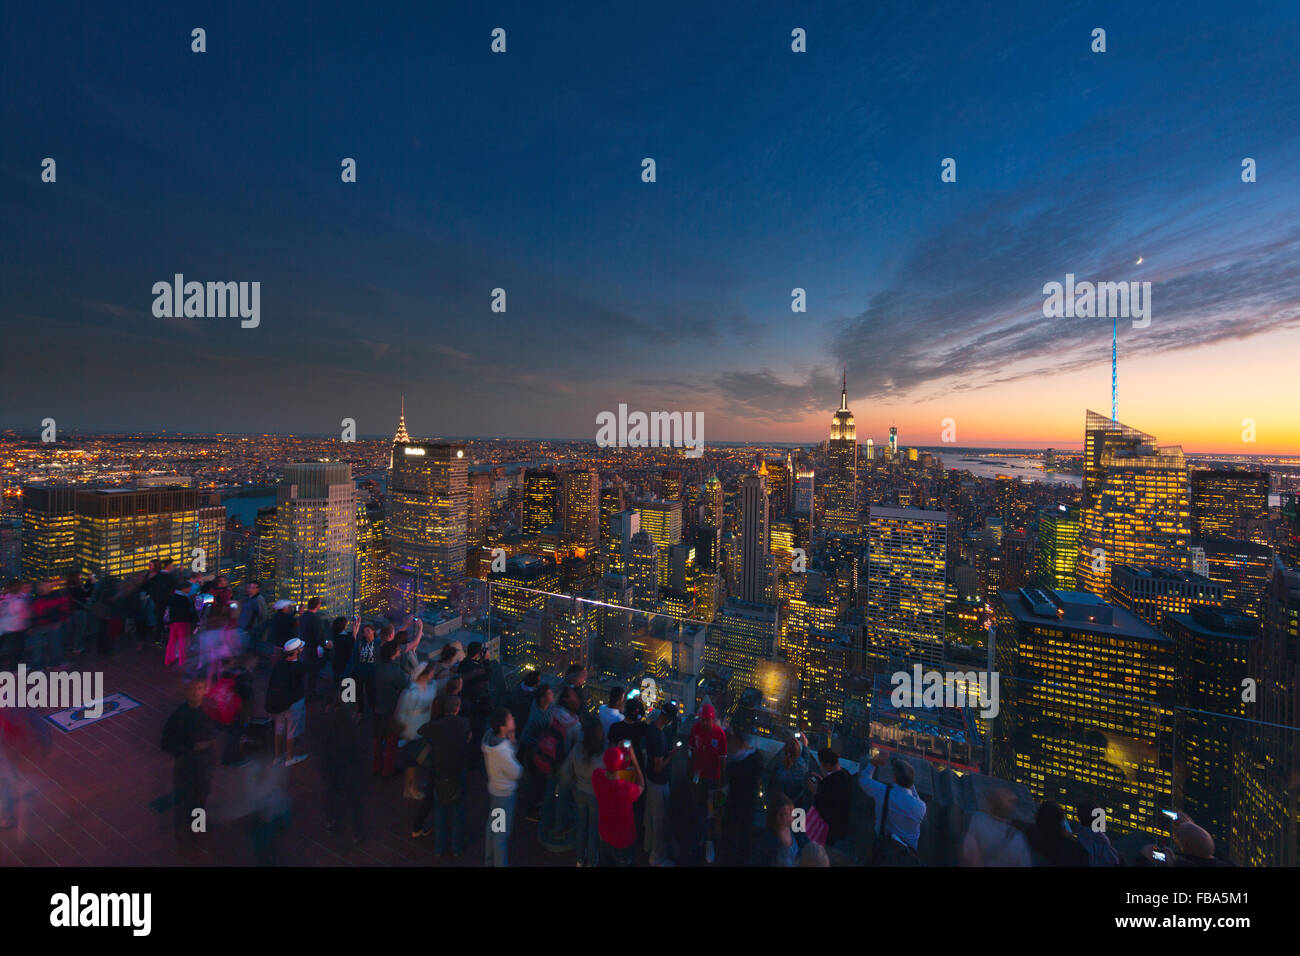 USA, New York State, New York City, Manhattan, View of cityscape from top of Rockefeller Center at dusk Stock Photo